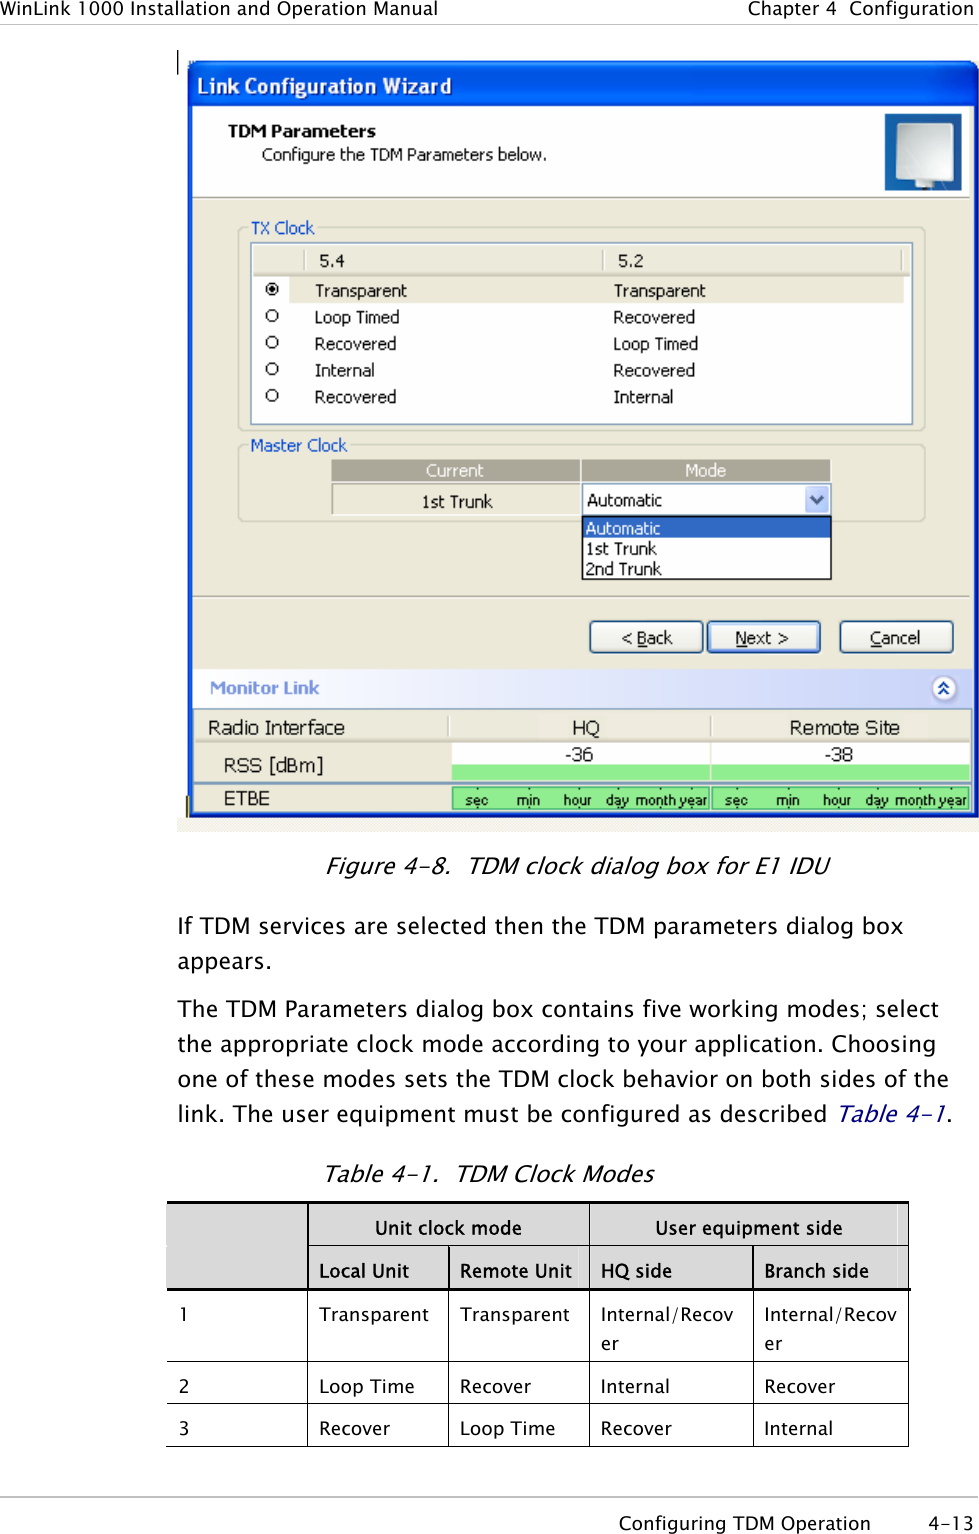 WinLink 1000 Installation and Operation Manual  Chapter  4  Configuration  Figure  4-8.  TDM clock dialog box for E1 IDU If TDM services are selected then the TDM parameters dialog box appears. The TDM Parameters dialog box contains five working modes; select the appropriate clock mode according to your application. Choosing one of these modes sets the TDM clock behavior on both sides of the link. The user equipment must be configured as described Table  4-1. Table  4-1.  TDM Clock Modes  Unit clock mode  User equipment side  Local Unit  Remote Unit  HQ side  Branch side 1  Transparent Transparent Internal/Recover Internal/Recover 2 Loop Time Recover Internal Recover 3 Recover Loop Time Recover Internal  Configuring TDM Operation  4-13 